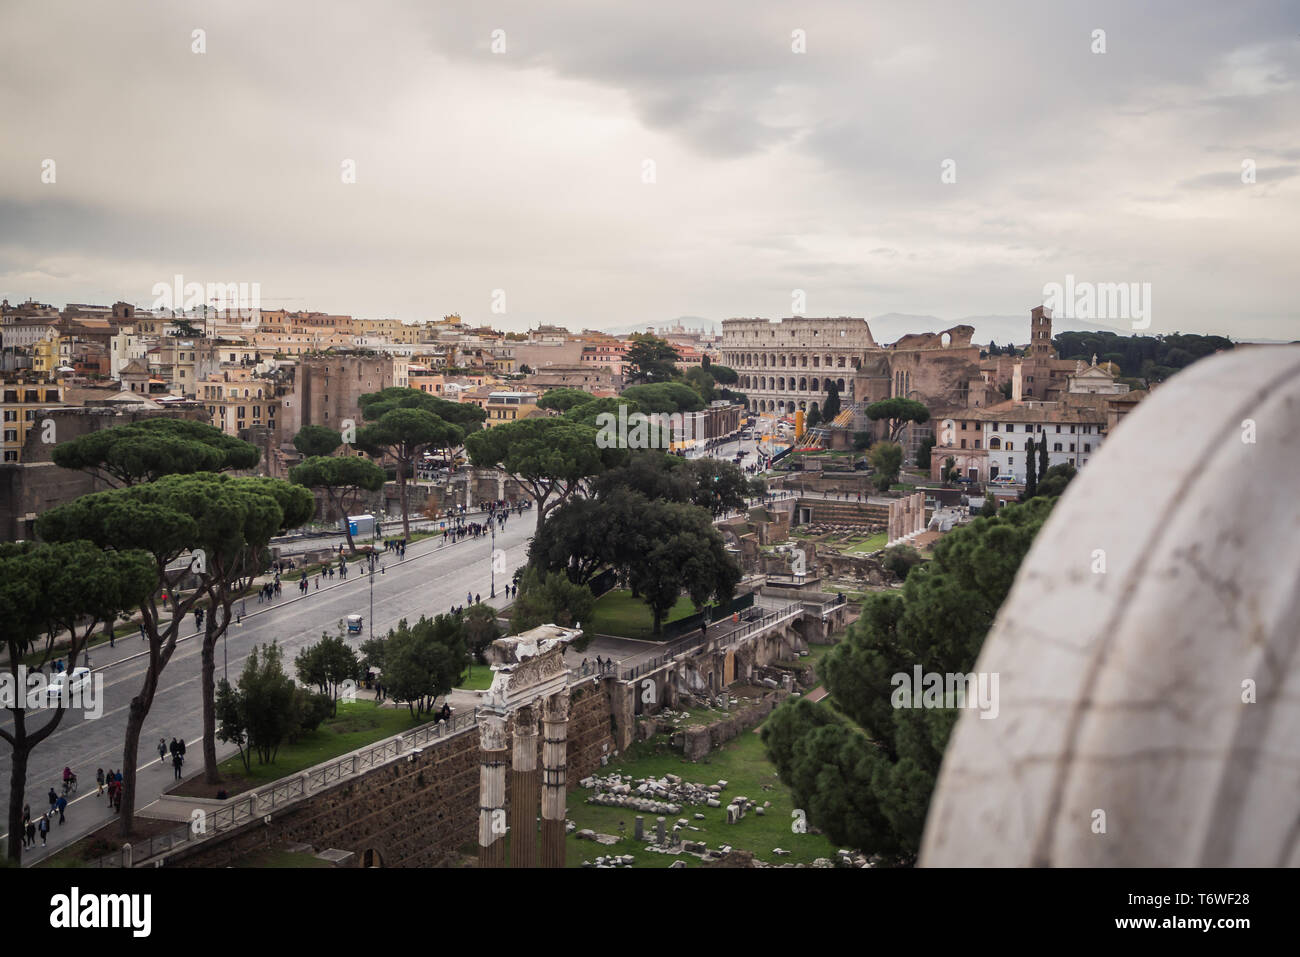 The old town from the Vittorio Emanuele II monument in Rome Italy Stock Photo